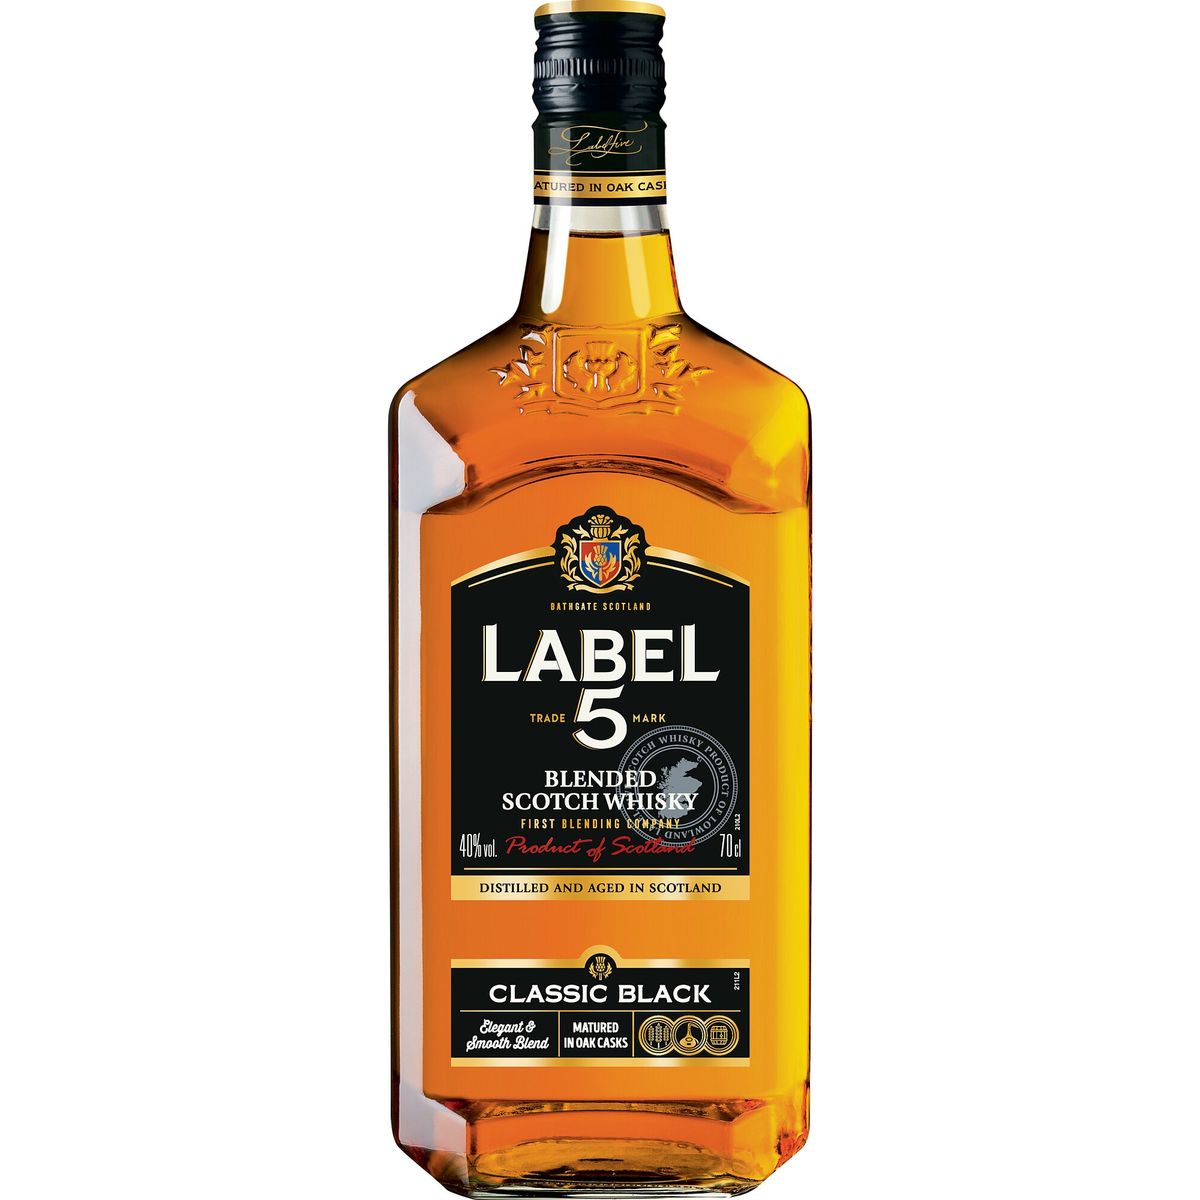 Label 5 Blended Scotch Whisky Classic Black 70 cl